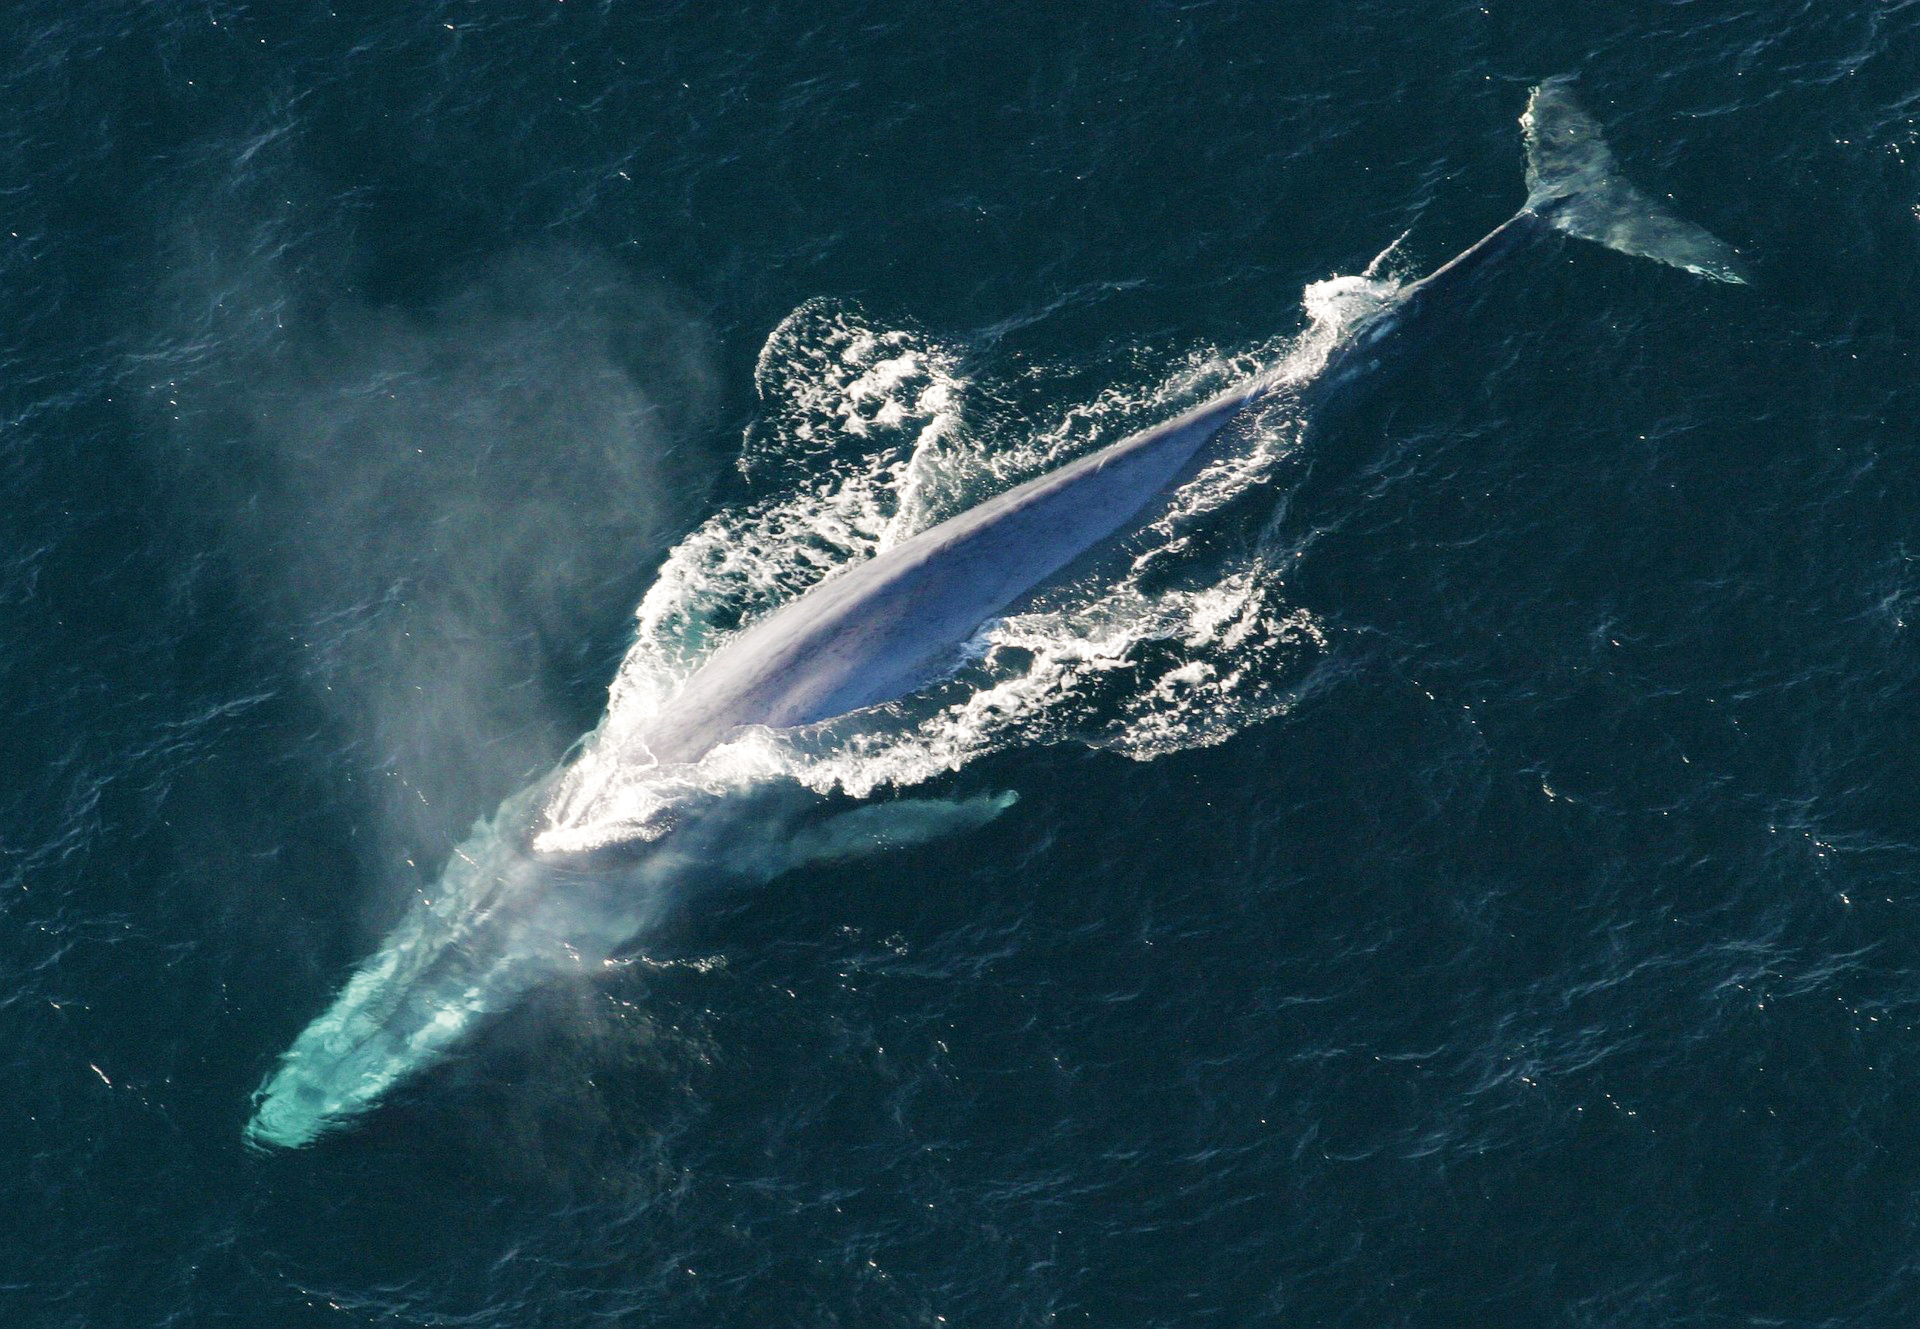 Record number of blue whales in Great Australian Bight spotted